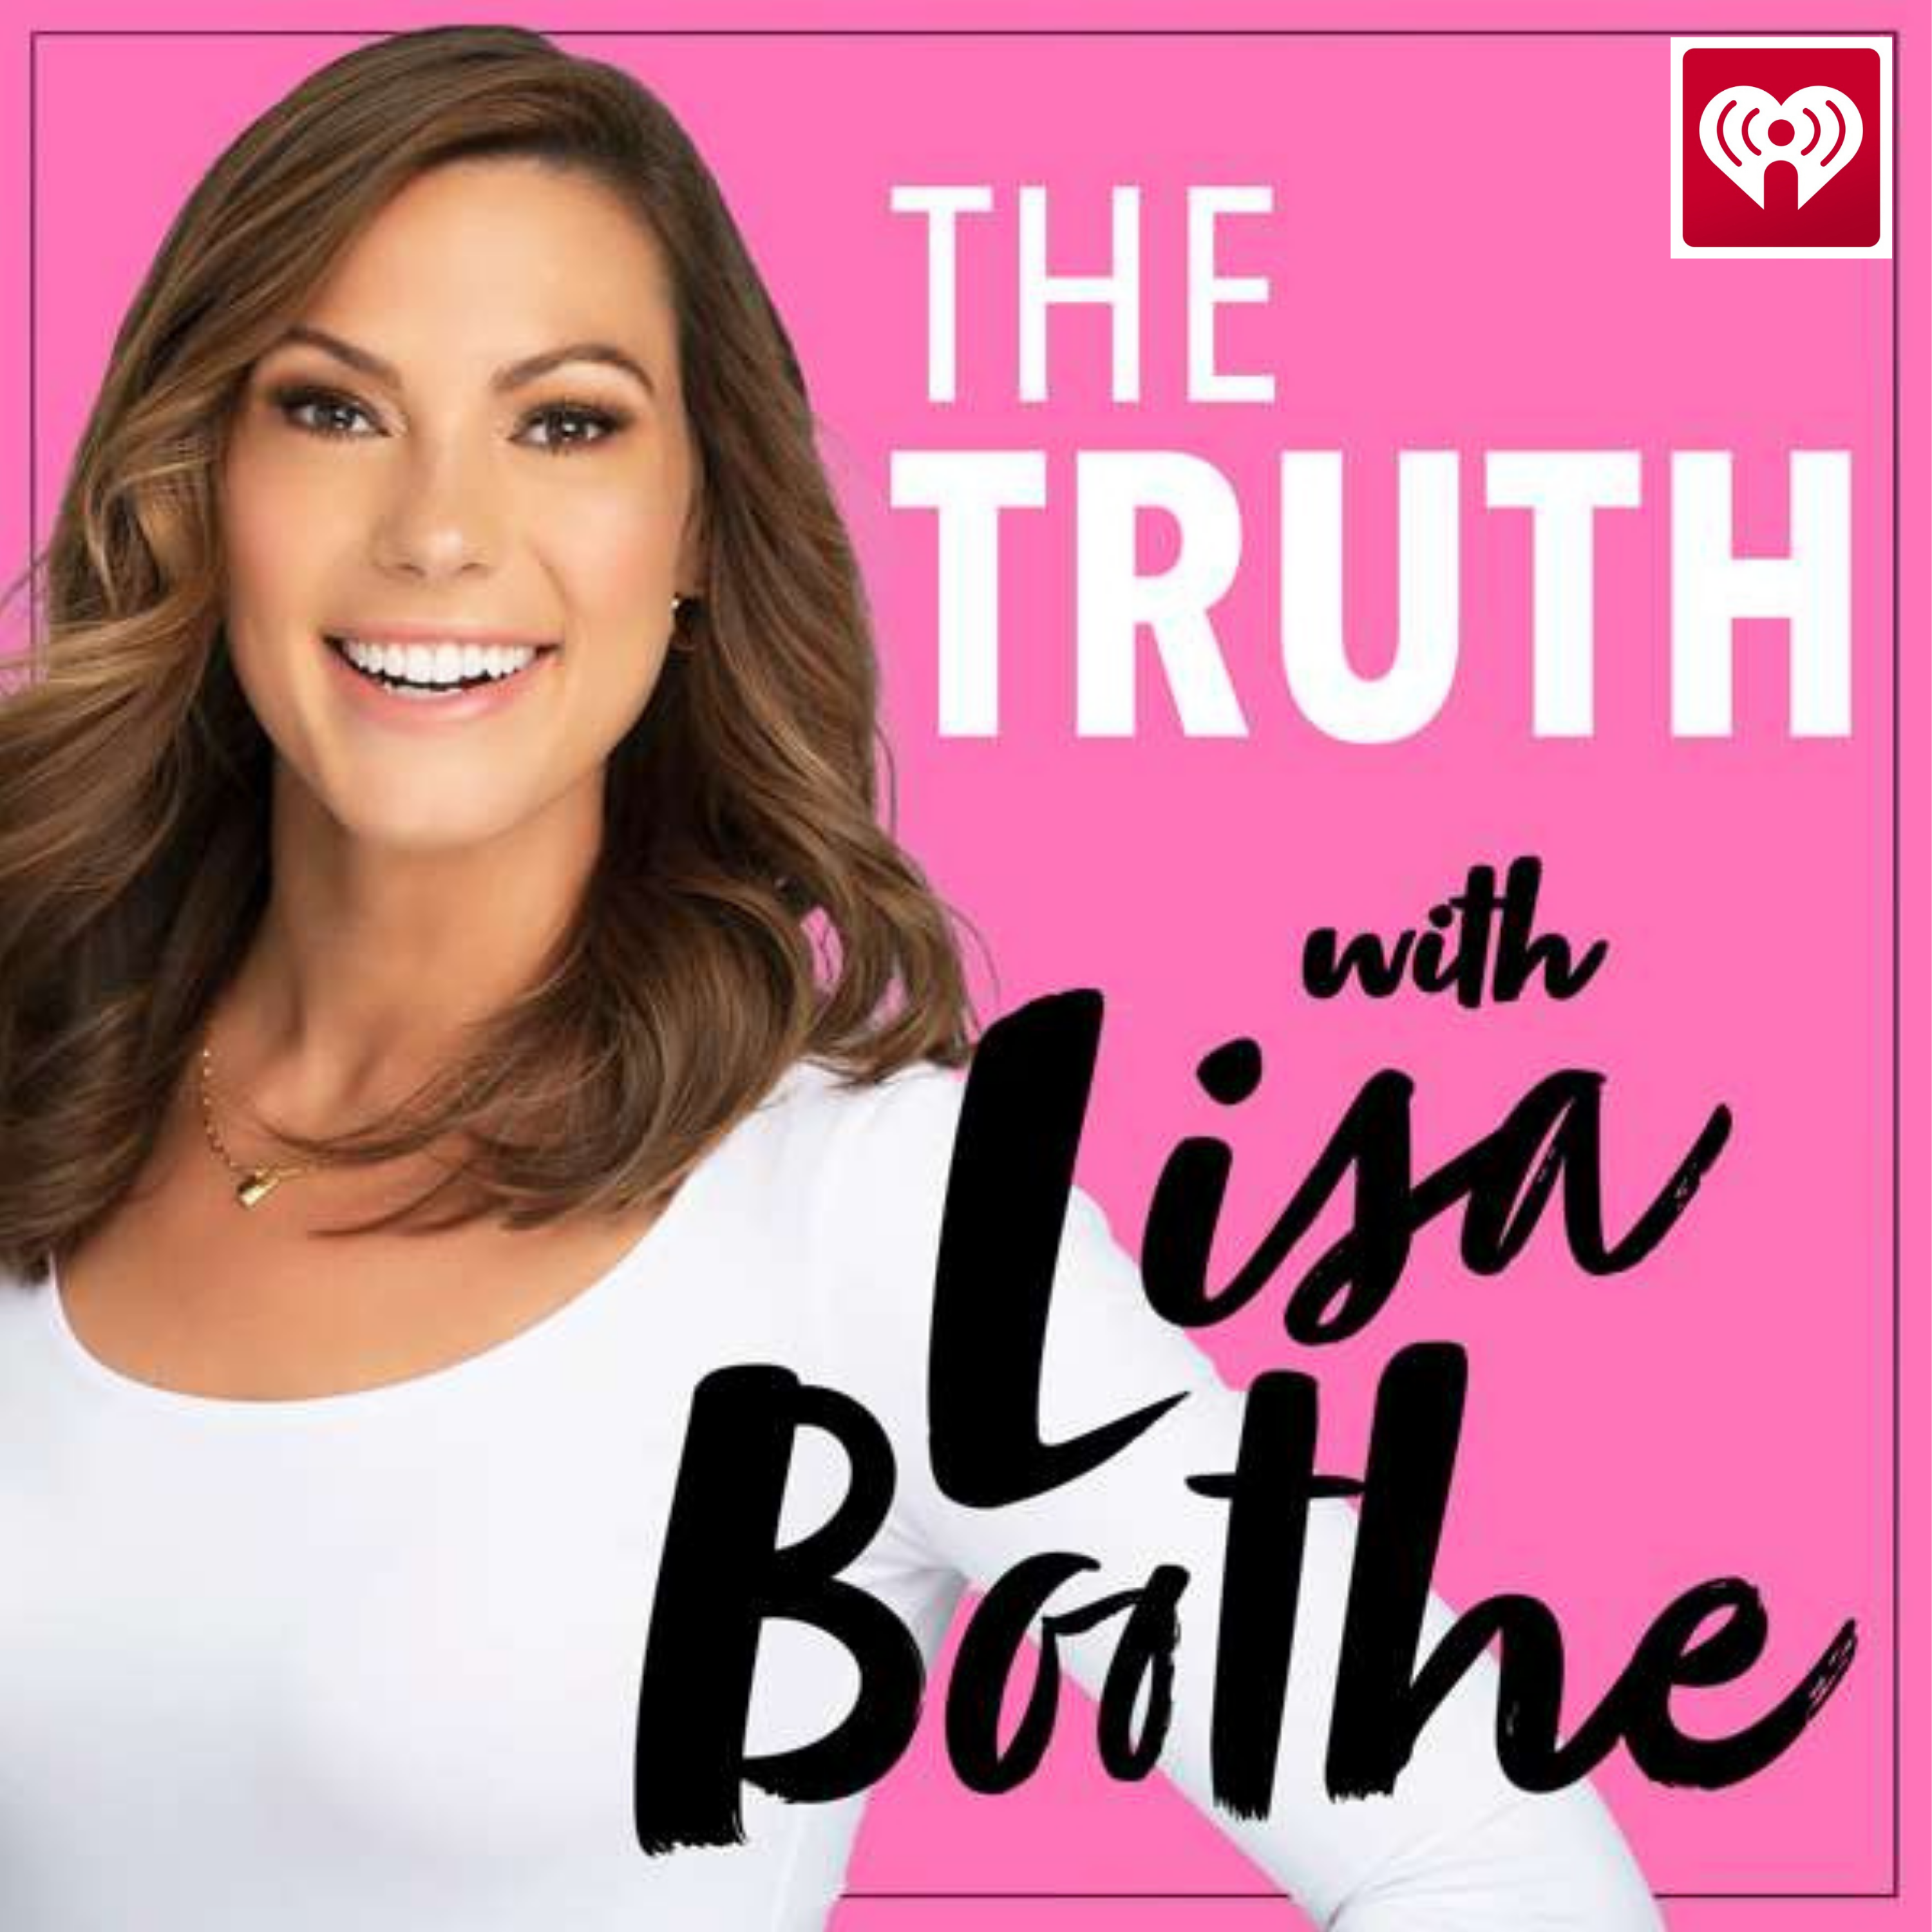 The Truth with Lisa Boothe: Inside Trump’s Iowa Victory with Robert Cahaly